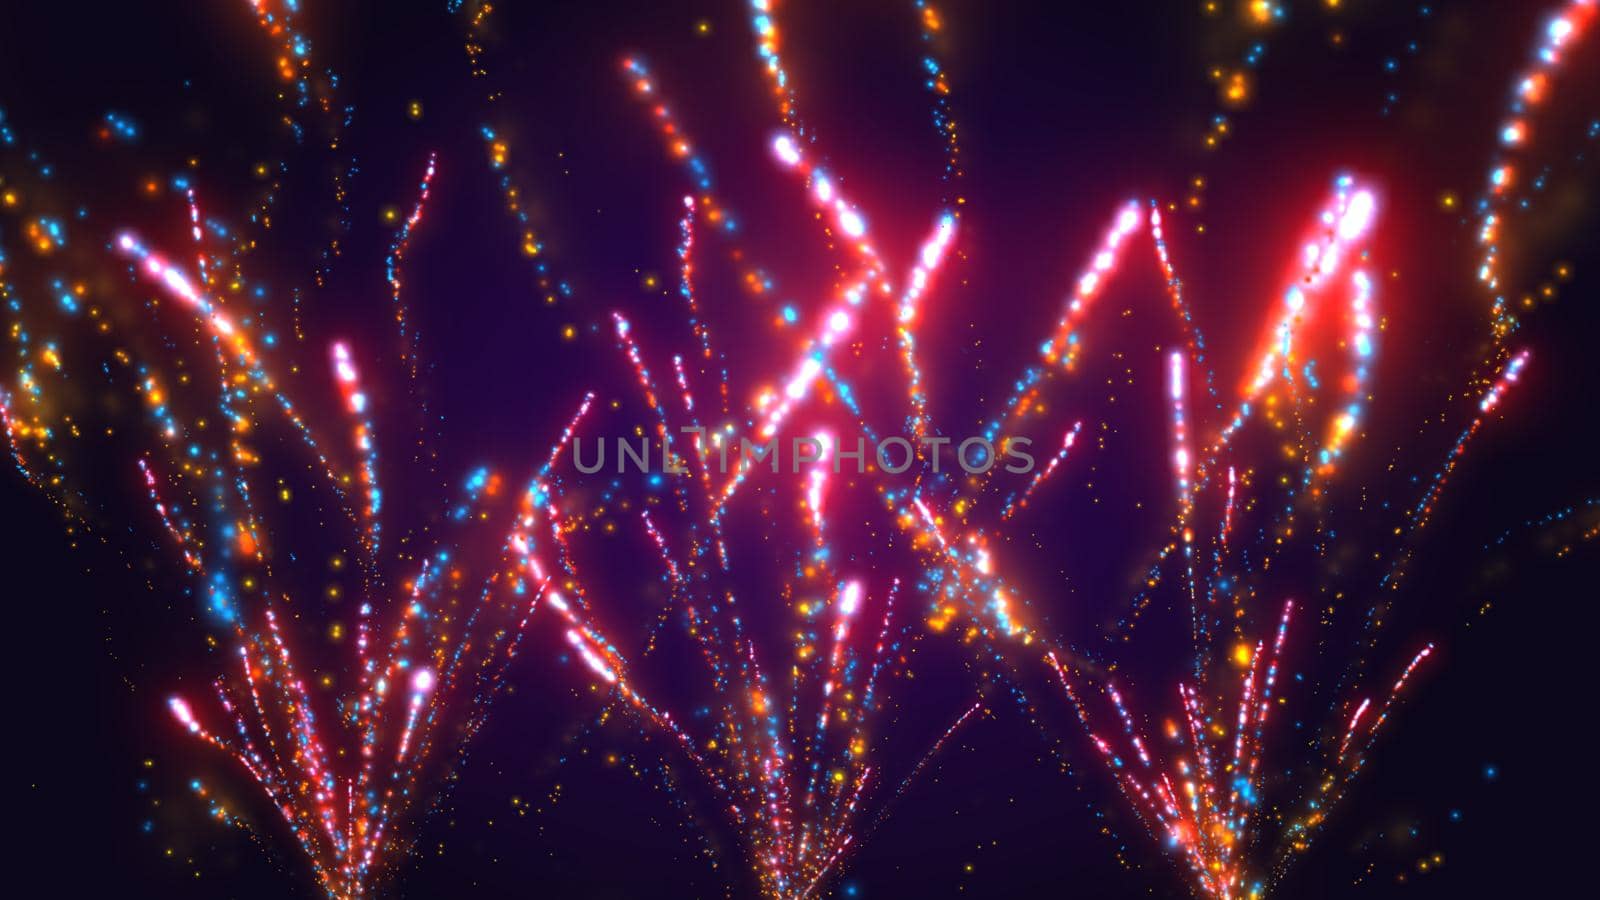 Abstract purple background with multicolored fireworks by Vvicca